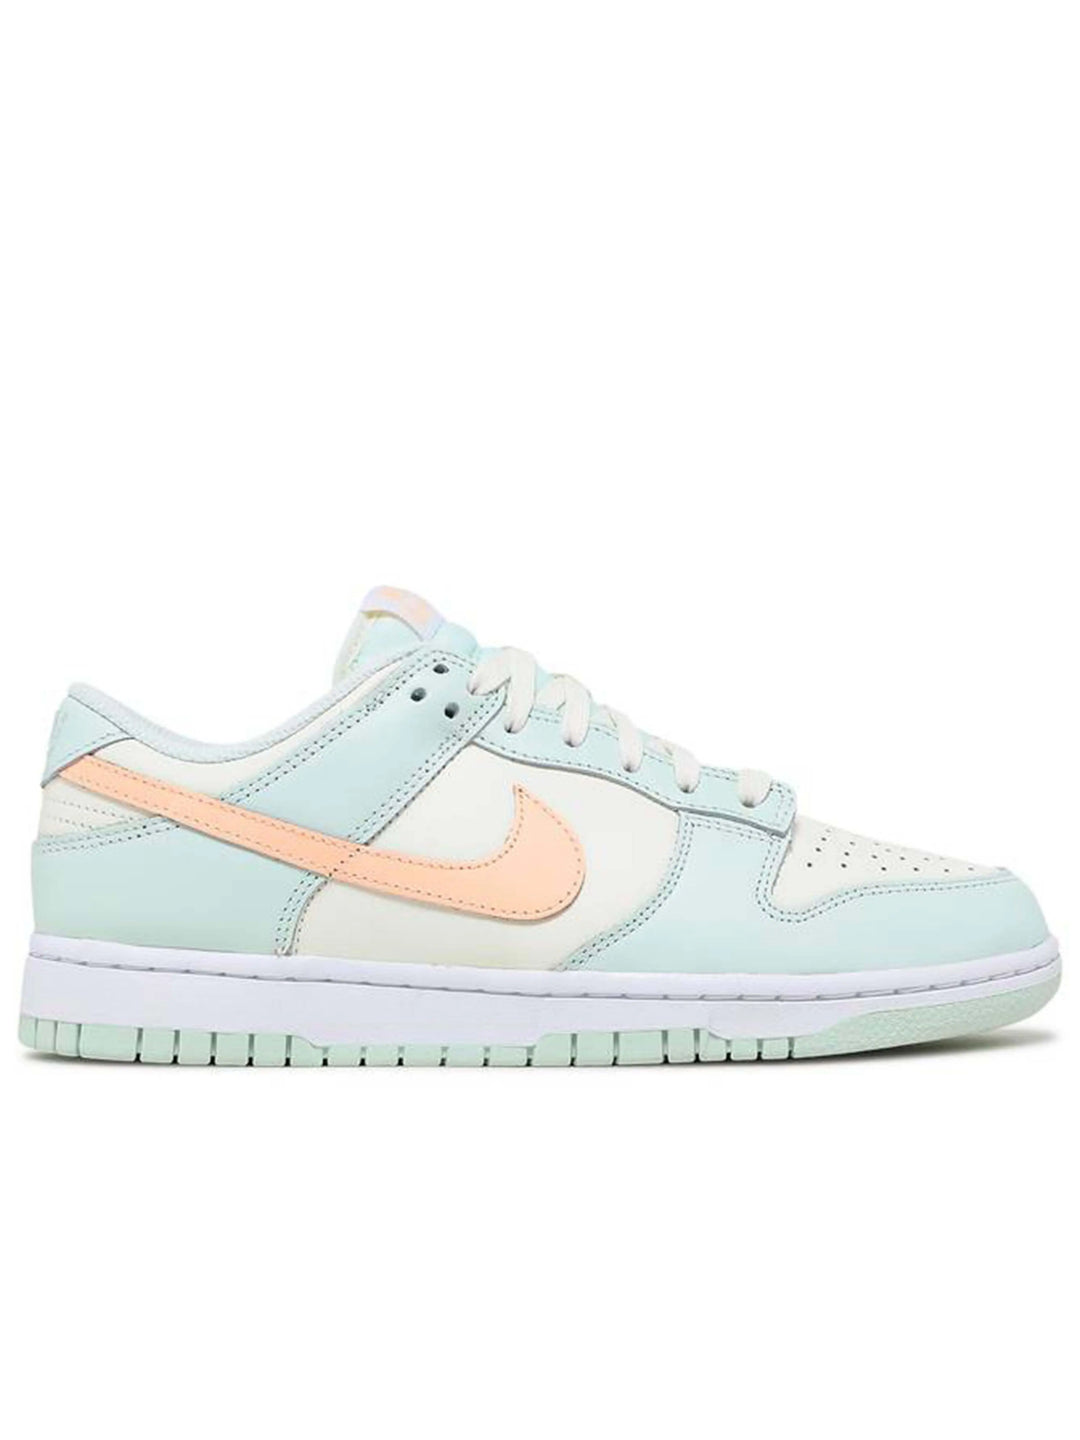 Nike Dunk Low Barely Green [W] Prior